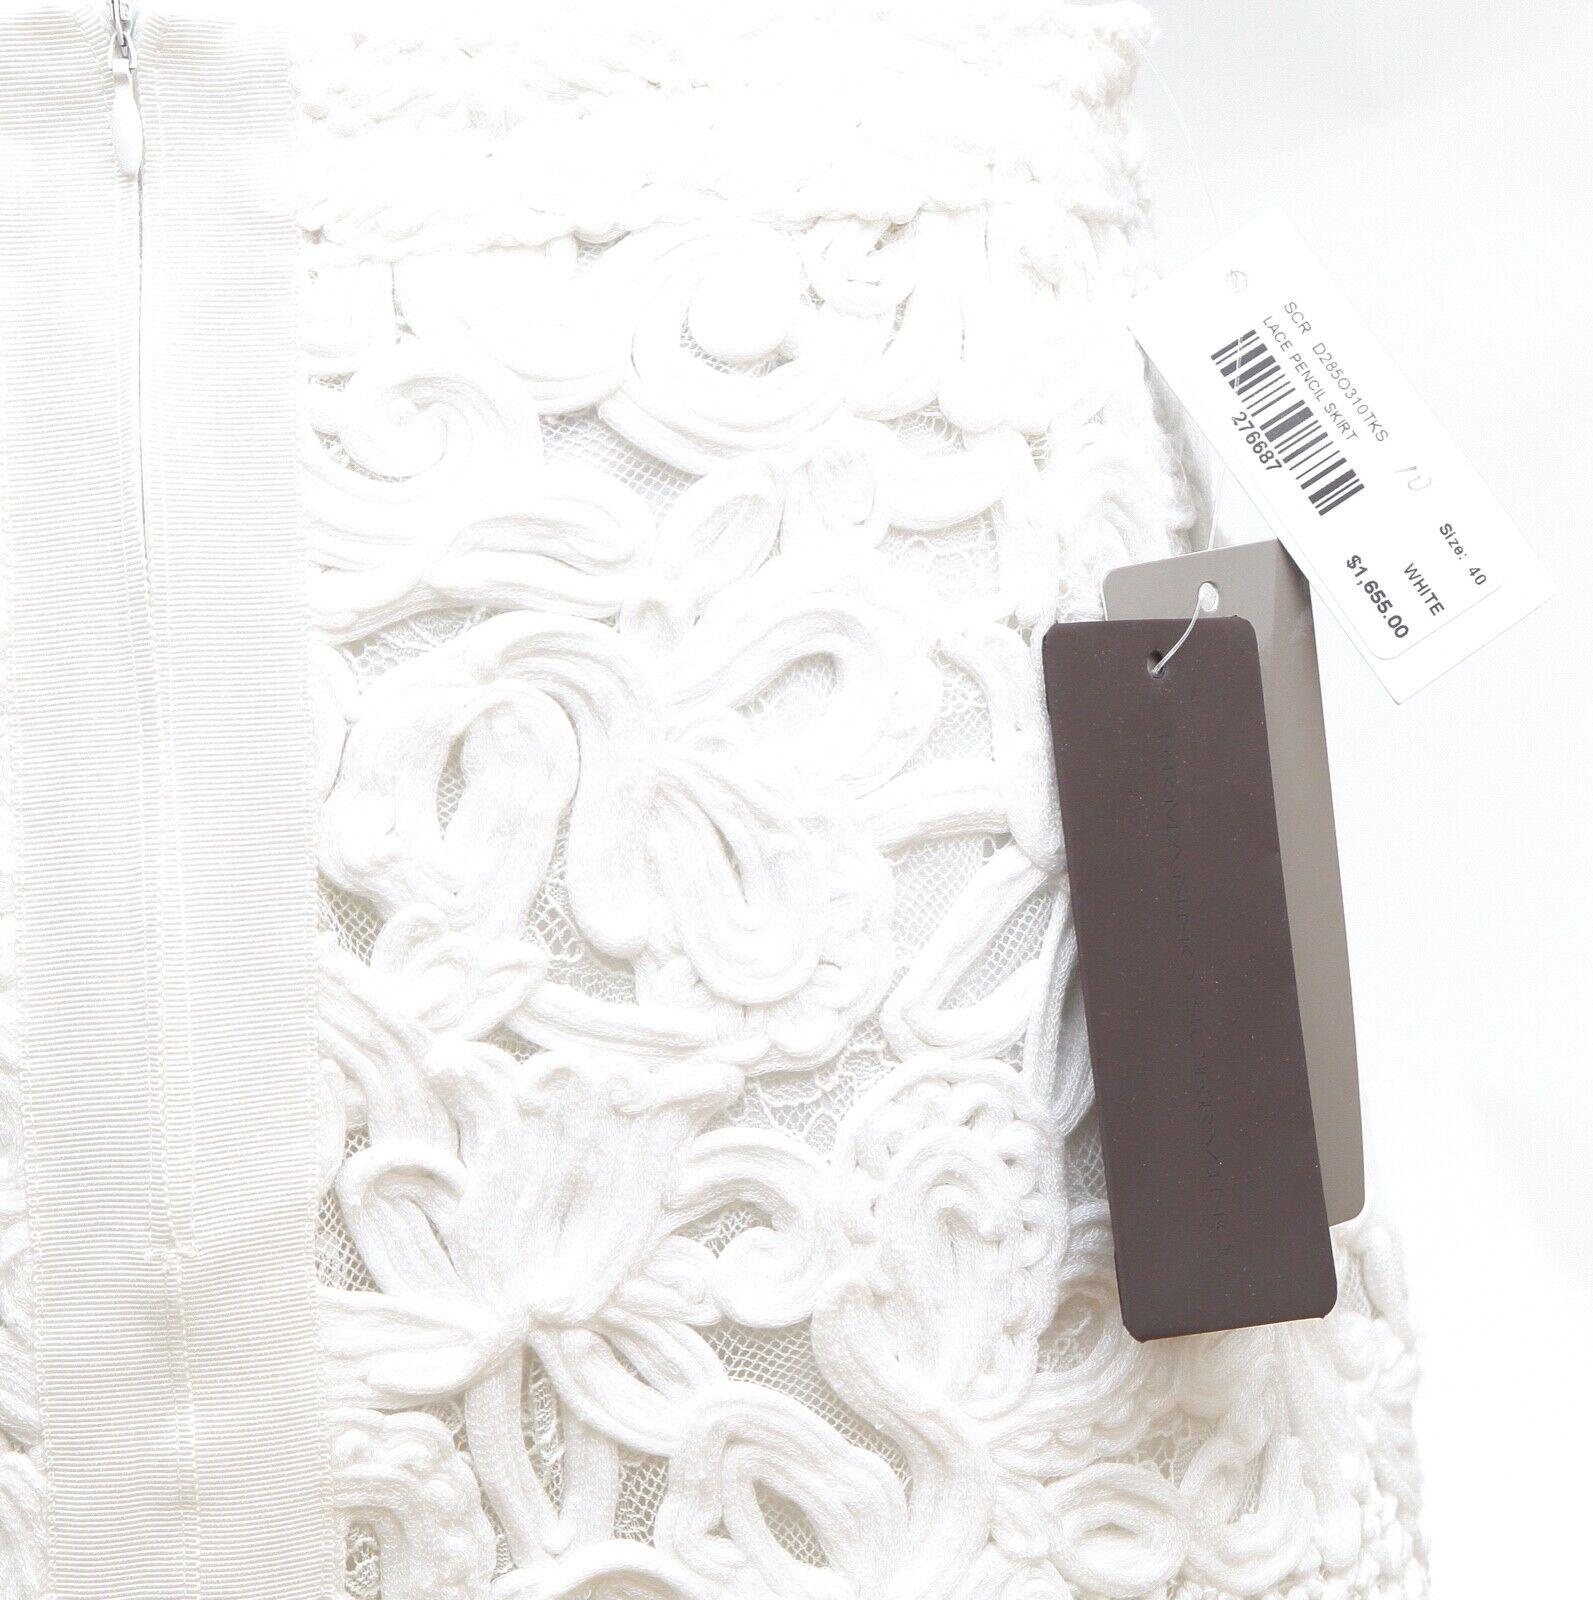 ERMANNO SCERVINO White Skirt Lace Pencil Lined Zipper Sz 40 NWT $1655 For Sale 1